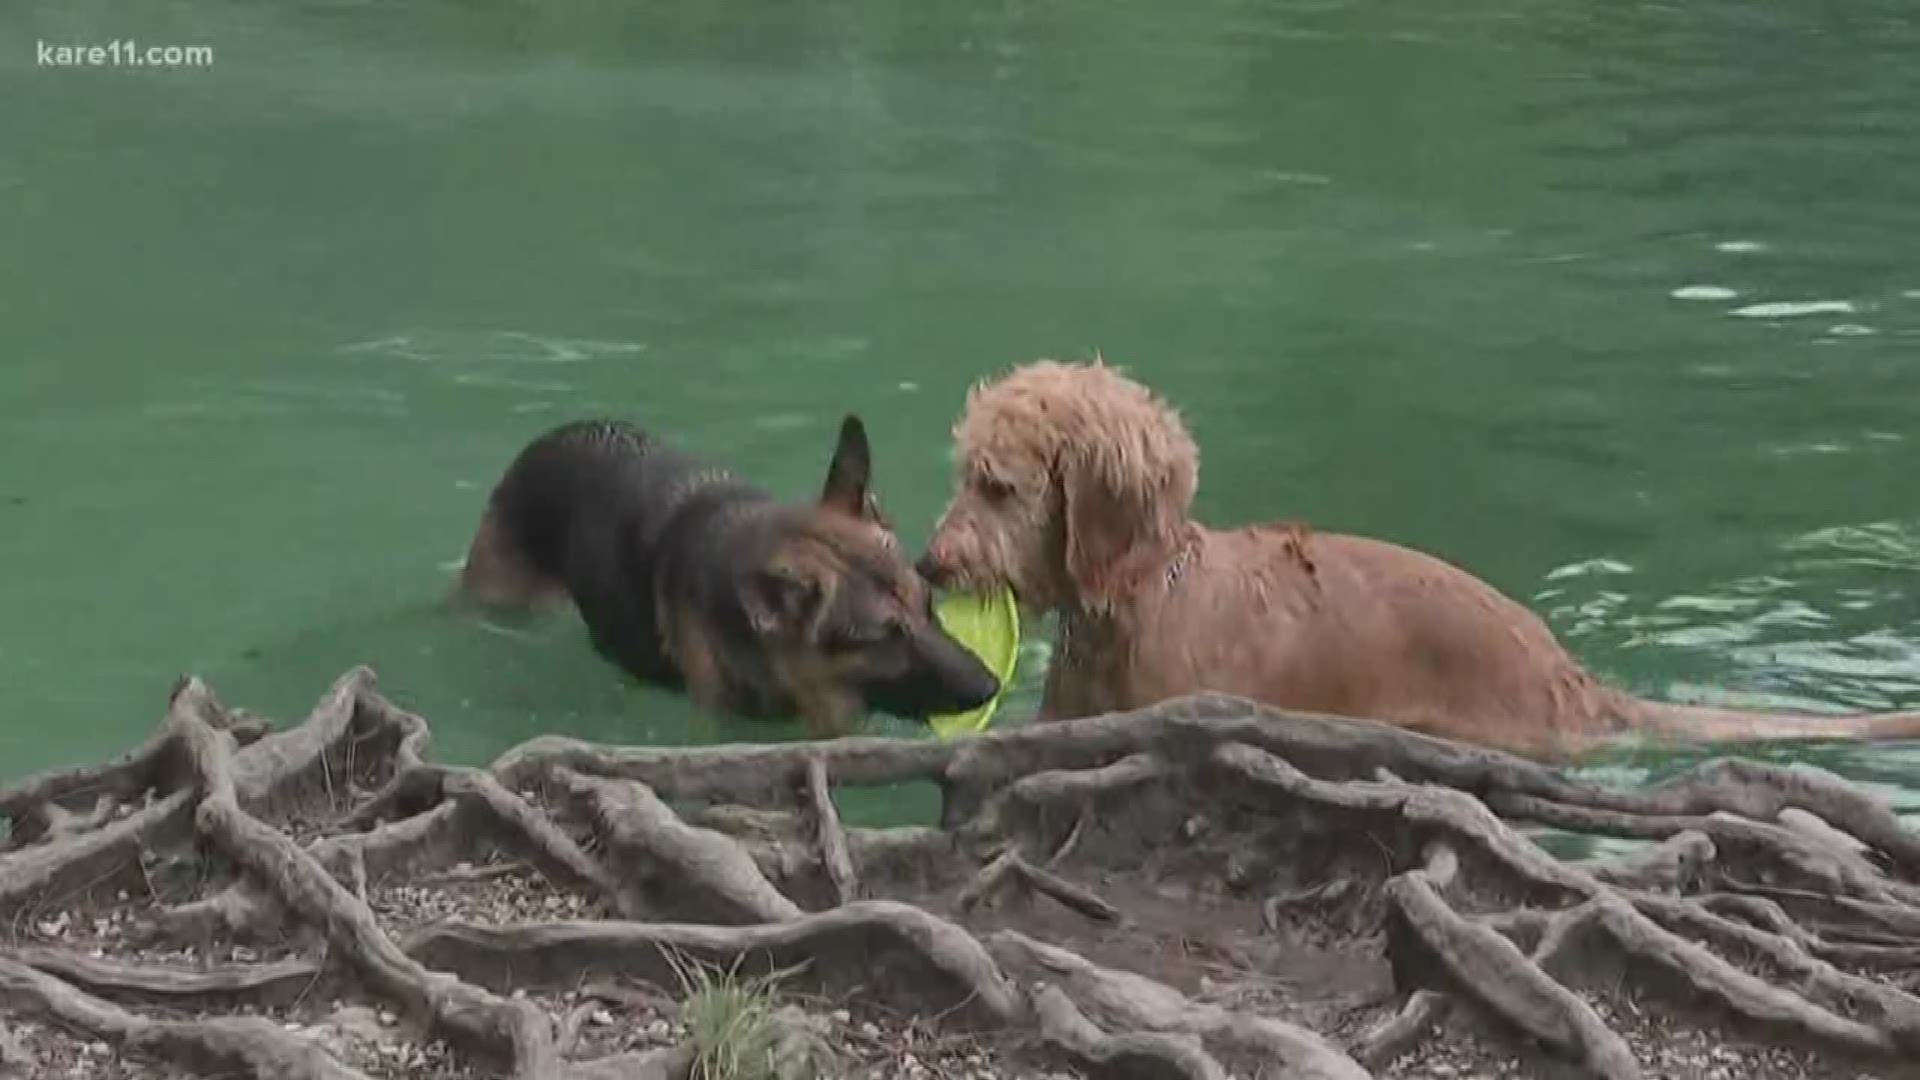 The topic of toxic algae is trending online after multiple reports from across the nation of dogs dying after swimming in lakes filled with blue-green algae.